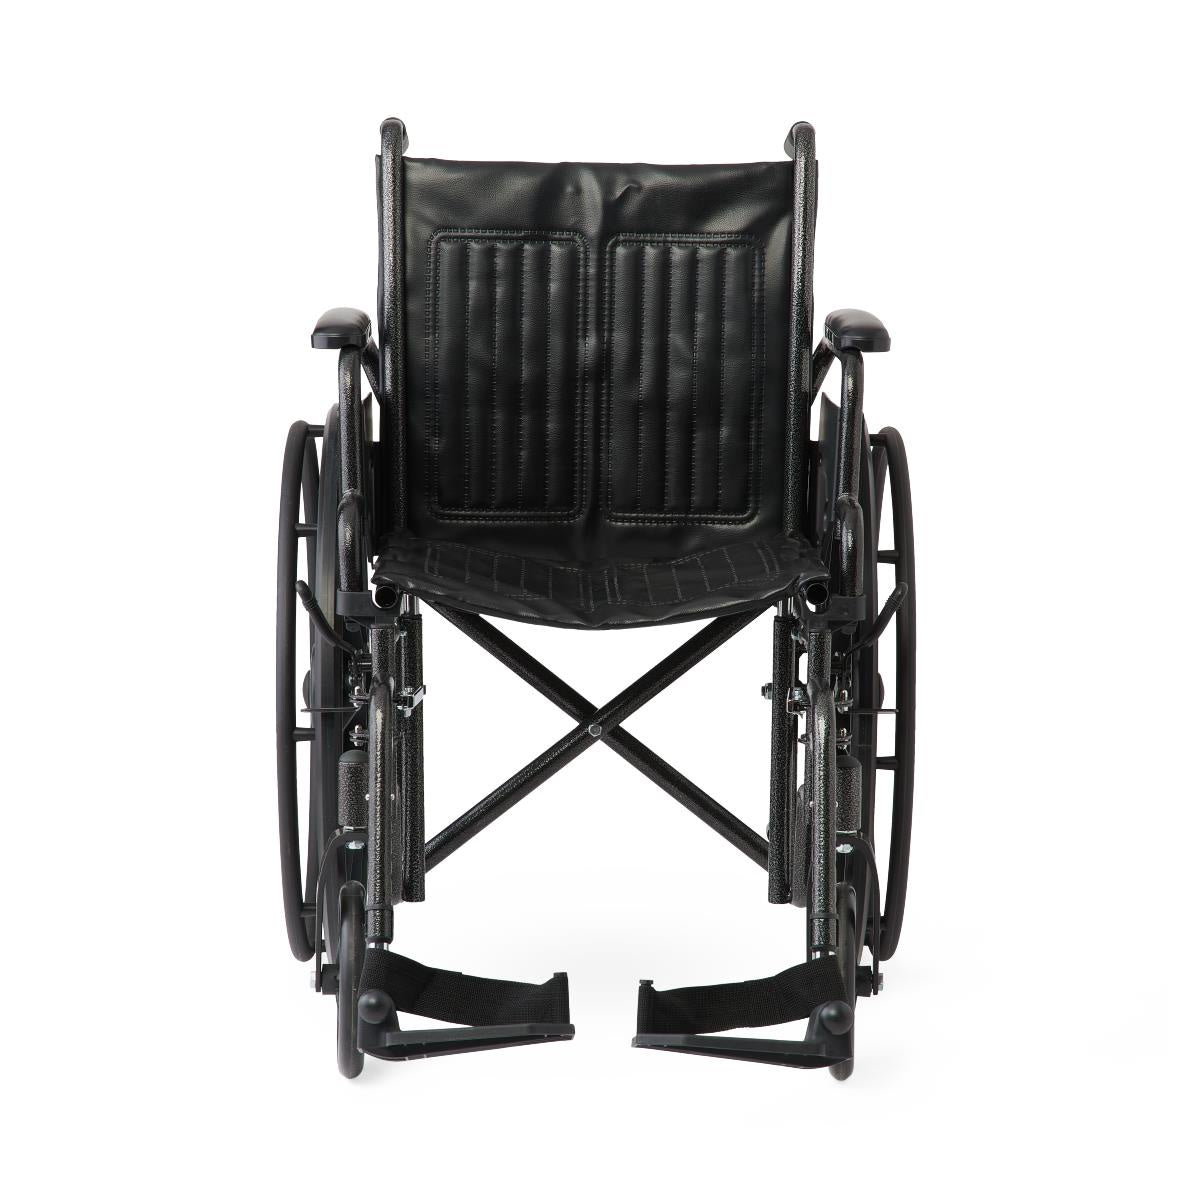 K1186V22S - 18" Wide K1 Basic Vinyl Wheelchair with Swing-Back Desk-Length Arms and Swing-Away Footrests